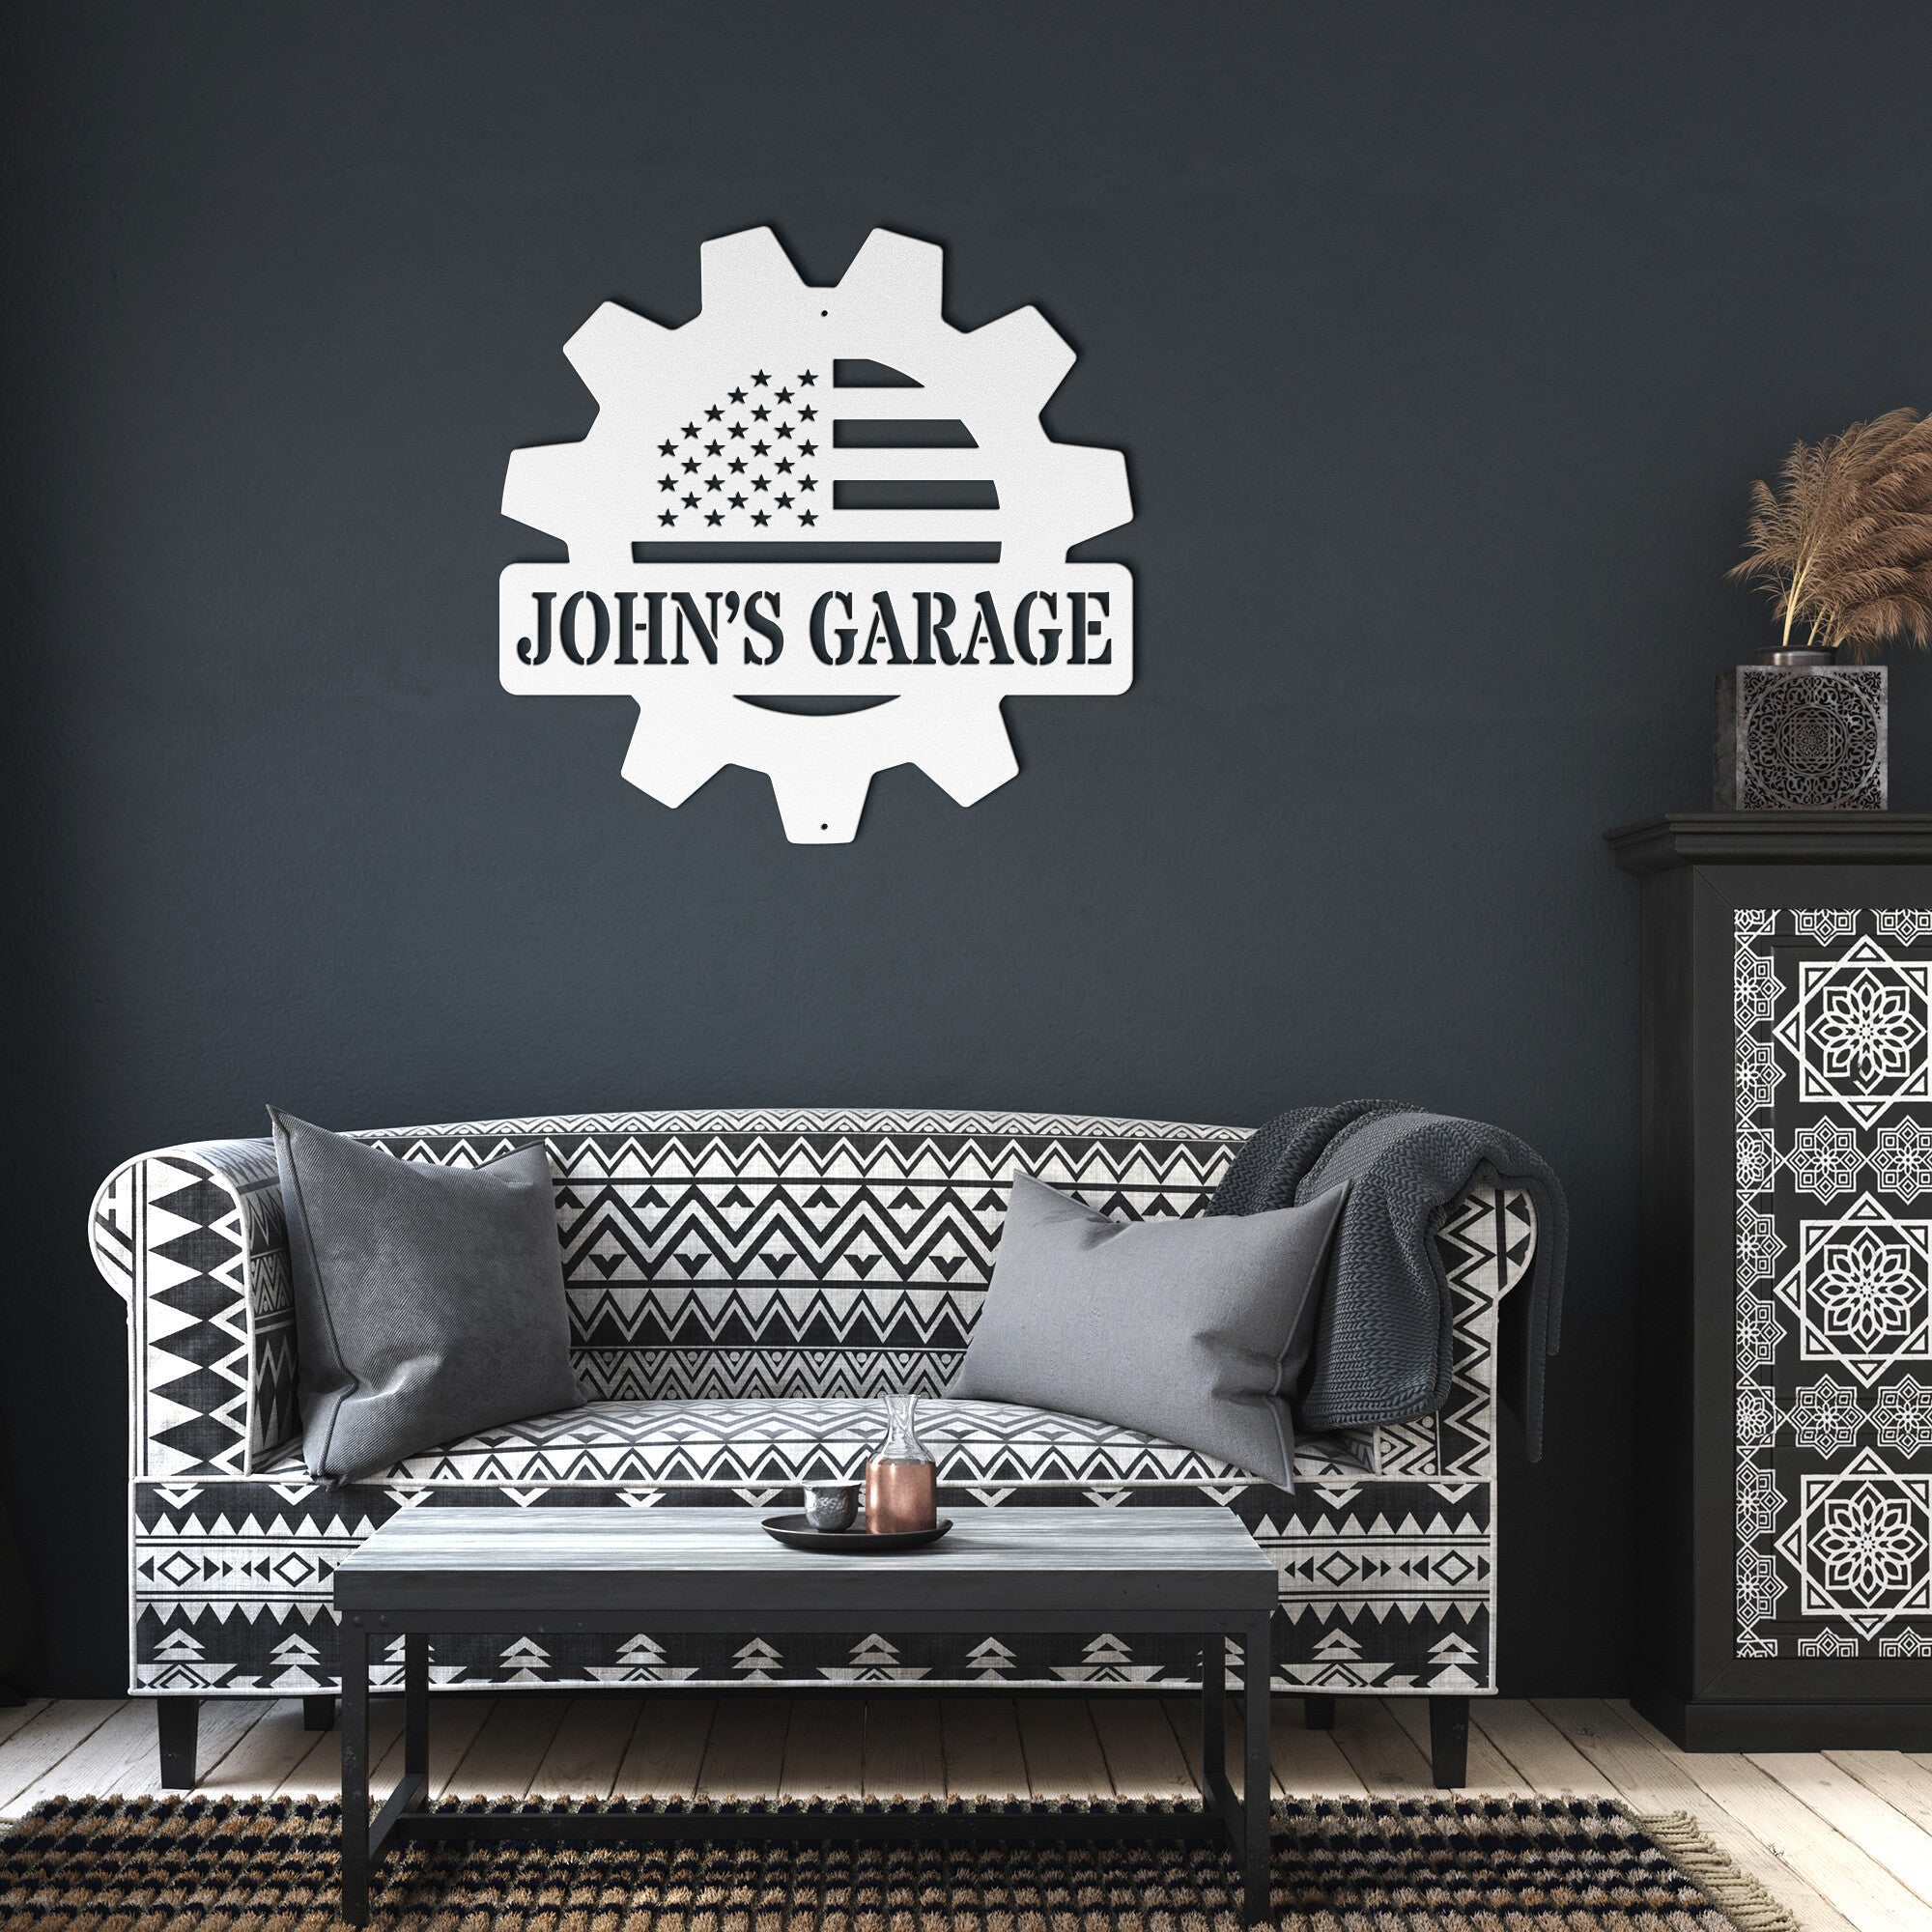 Personalized Gear Garage Sign - Cool Metal Signs